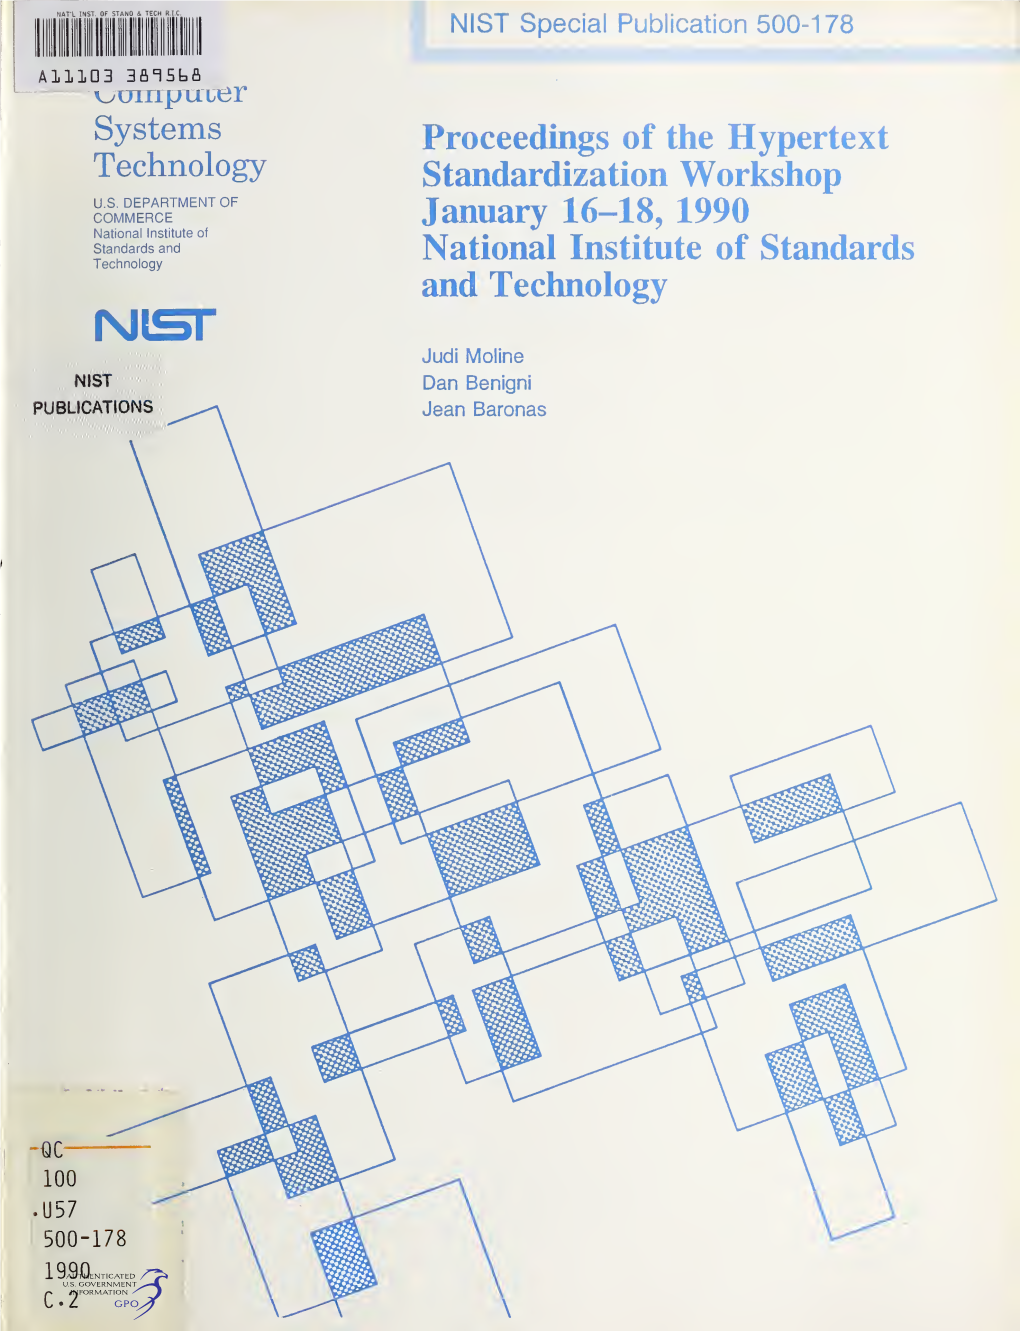 Proceedings of the Hypertext Standardization Workshop January 16-18, 1990 National Institute of Standards and Technology